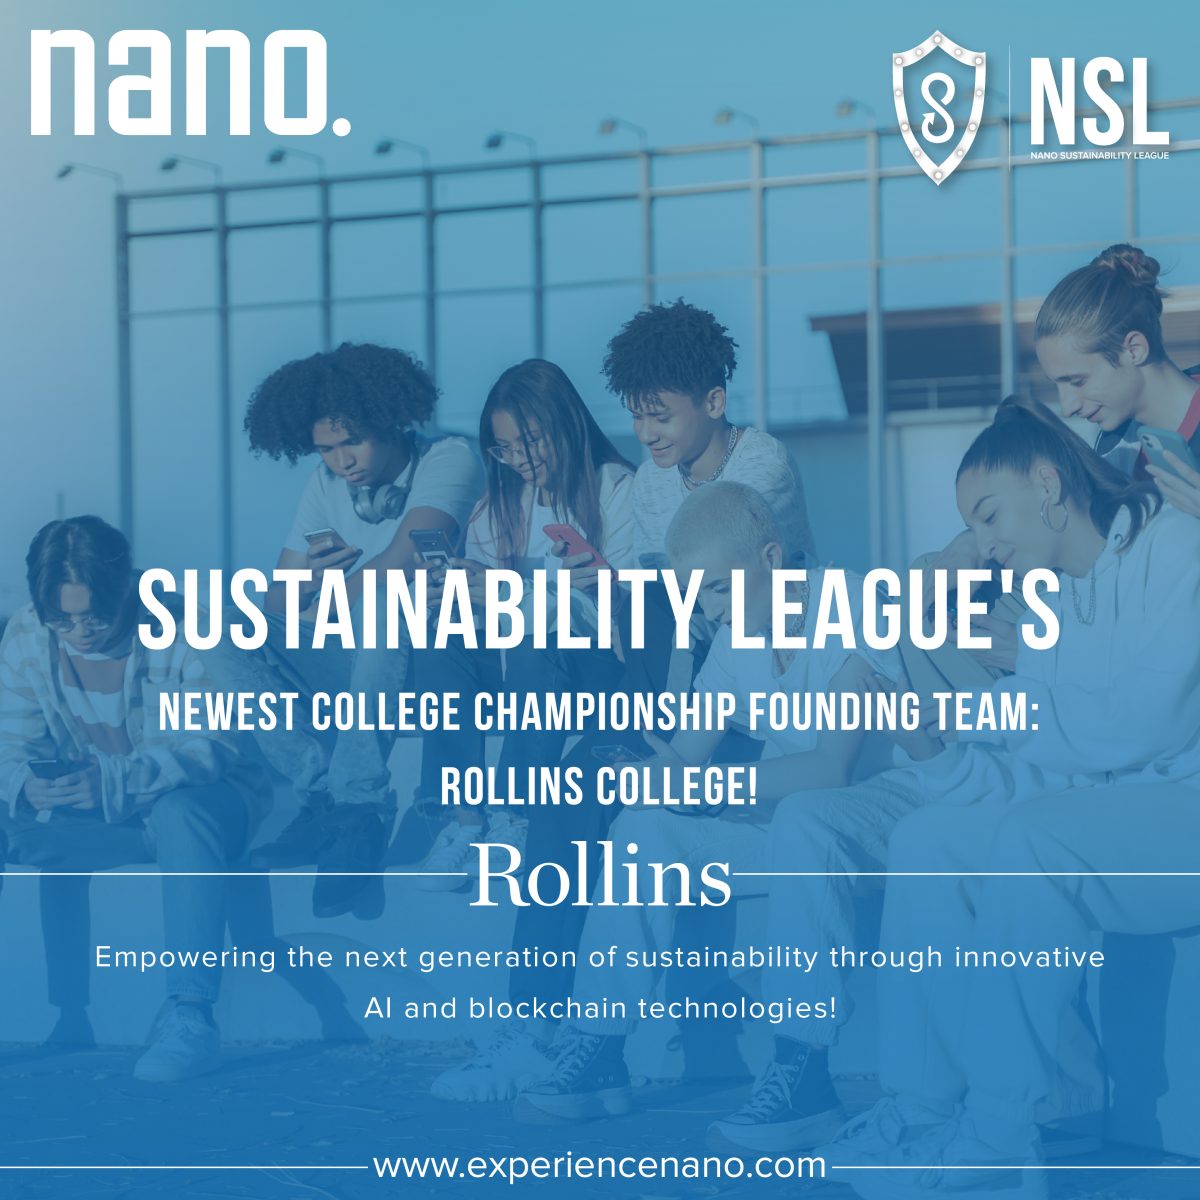 Sustainability League’s Newest College Championship Founding Team: Rollins College!